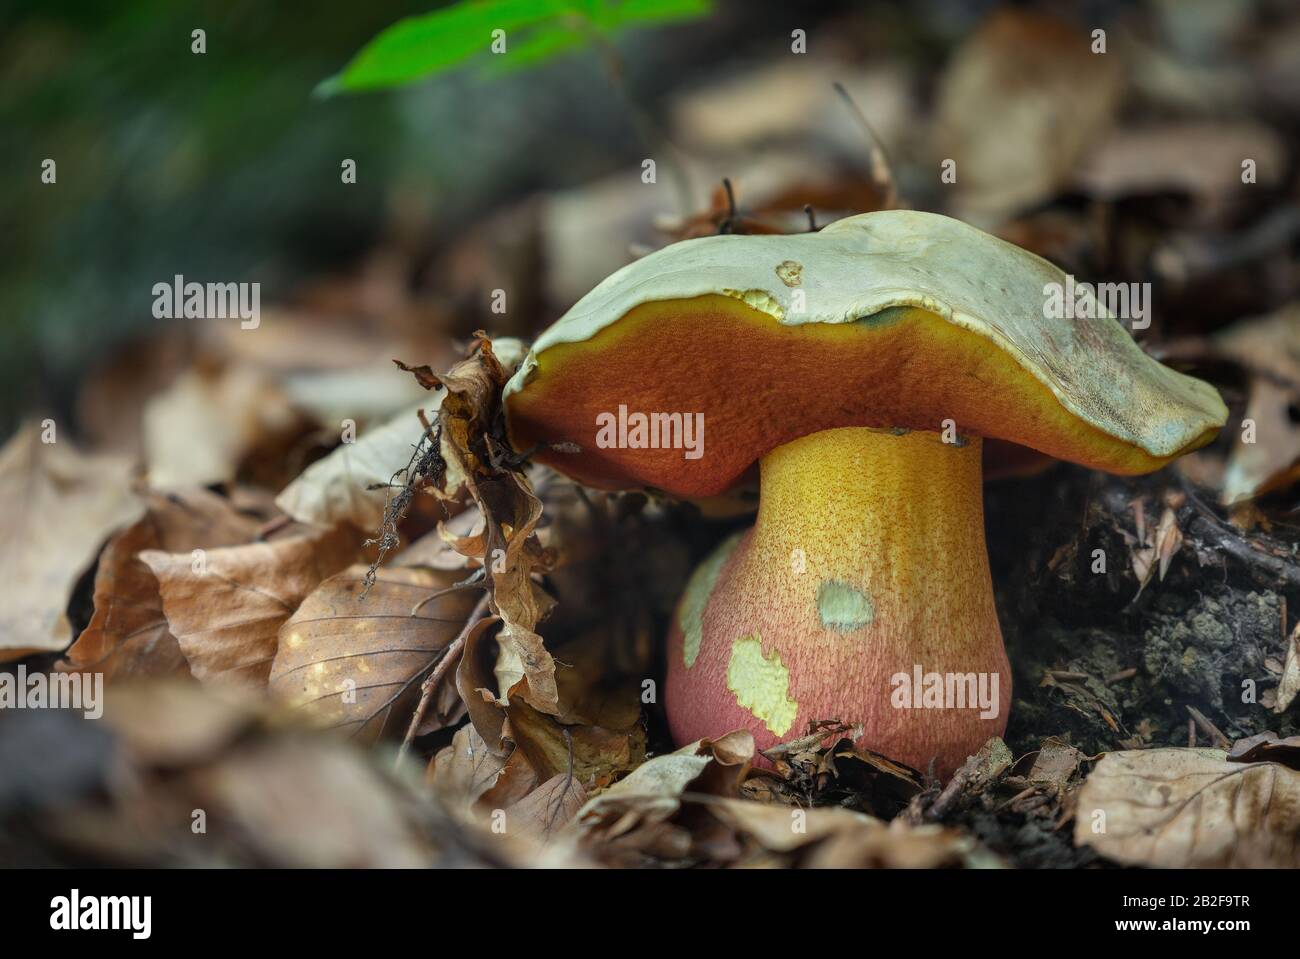 The poisonous fungus Rubroboletus satanas grows in the forests of Central Europe. Stock Photo